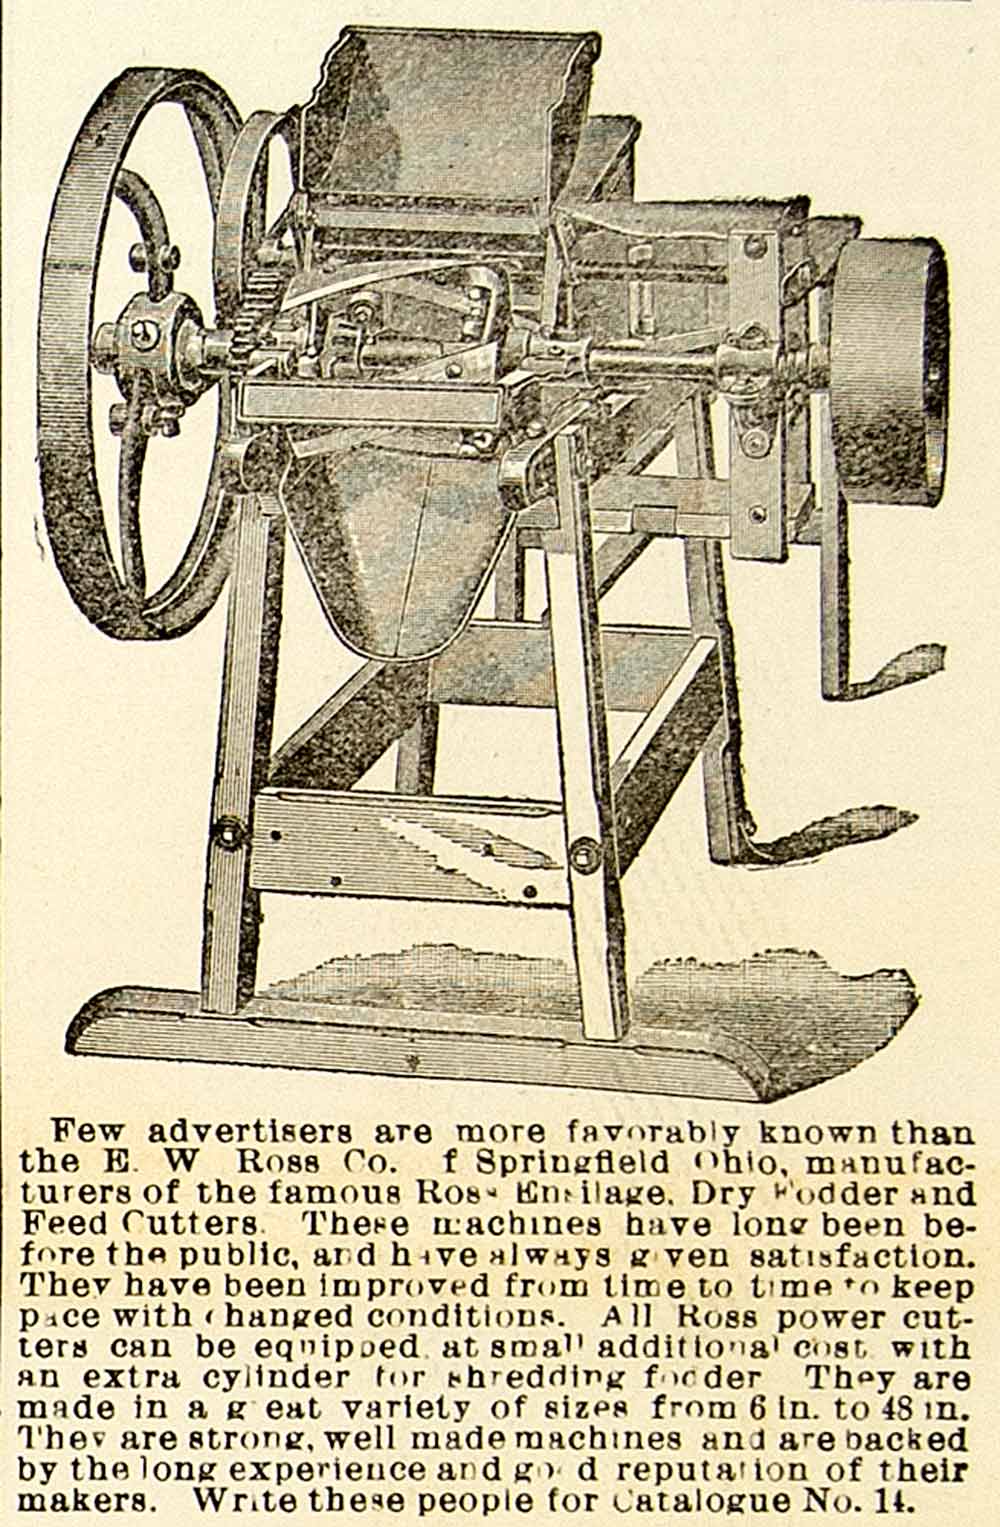 1899 Ad Ross Ensilage Dry Fooder Feed Cutter Machinery Farm Equipment CG3